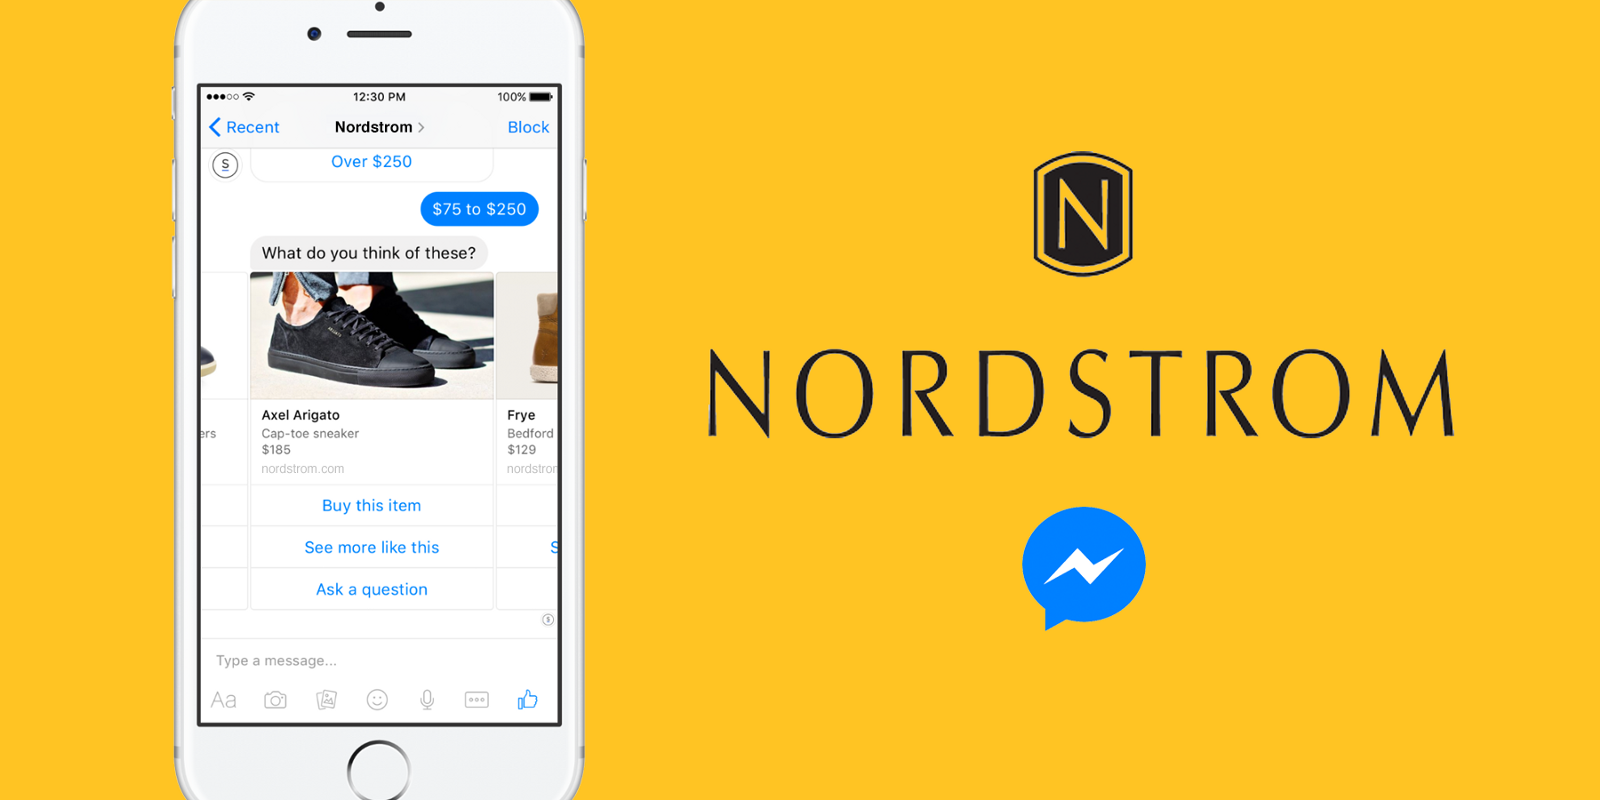 Nordstrom used chatbot based content marketing